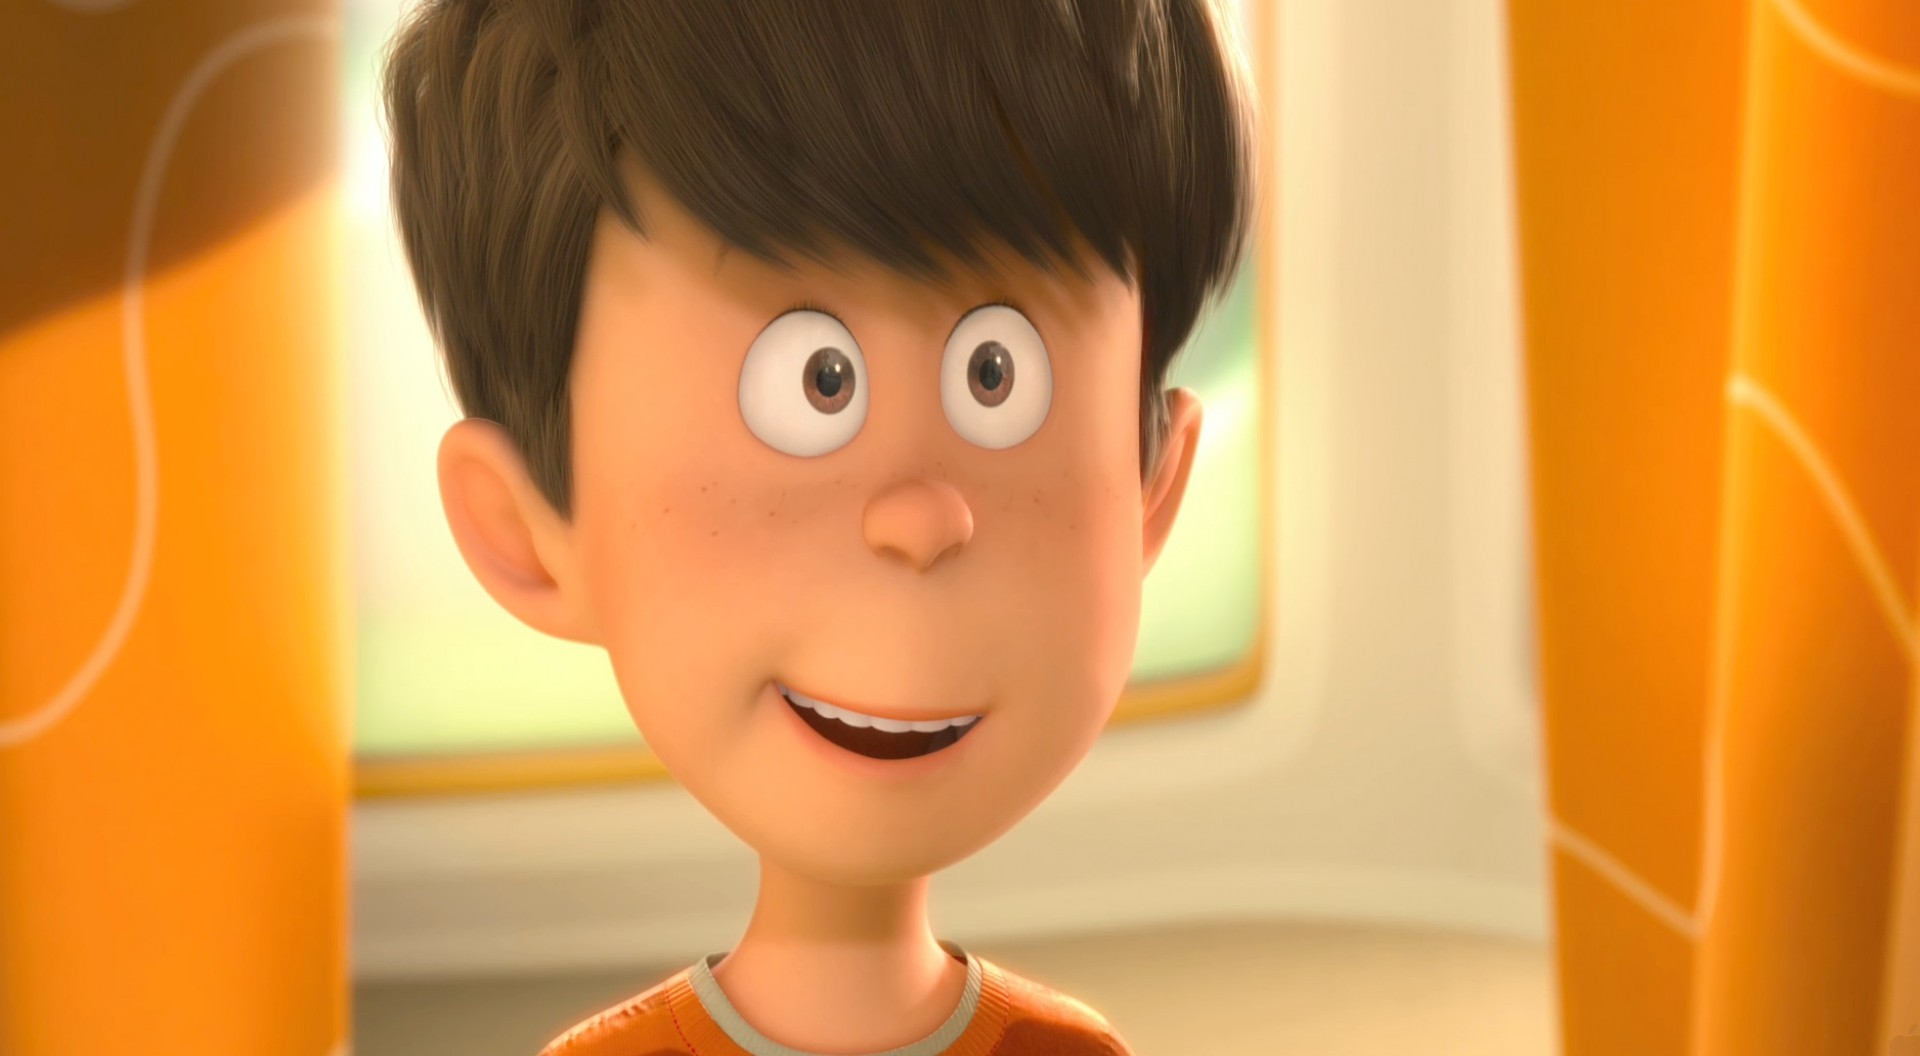 In the Lorax Ted is a proactive and reactive character. 